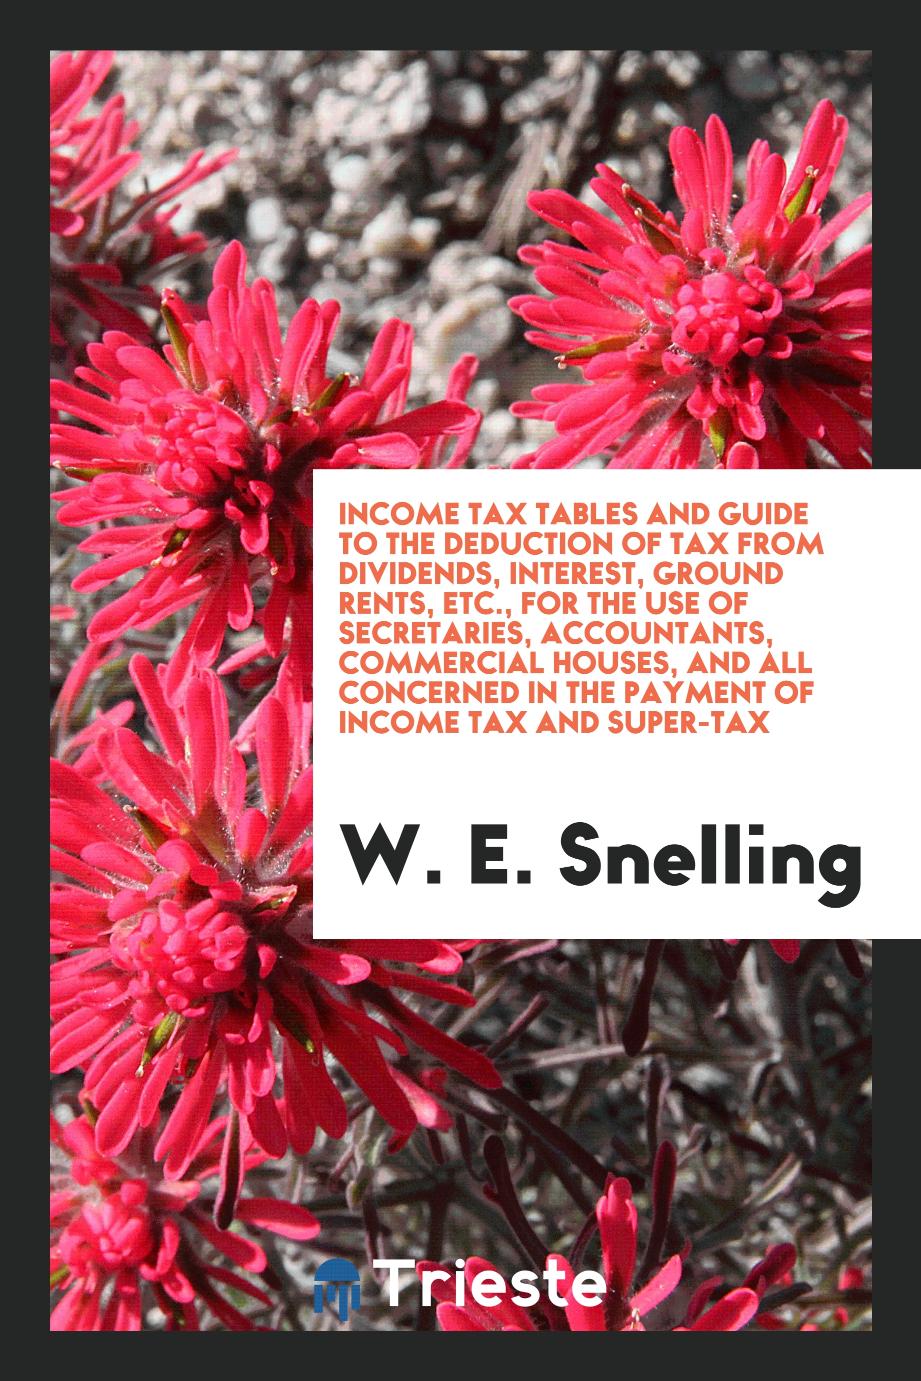 Income tax tables and guide to the deduction of tax from dividends, interest, ground rents, etc., for the use of secretaries, accountants, commercial houses, and all concerned in the payment of income tax and super-tax